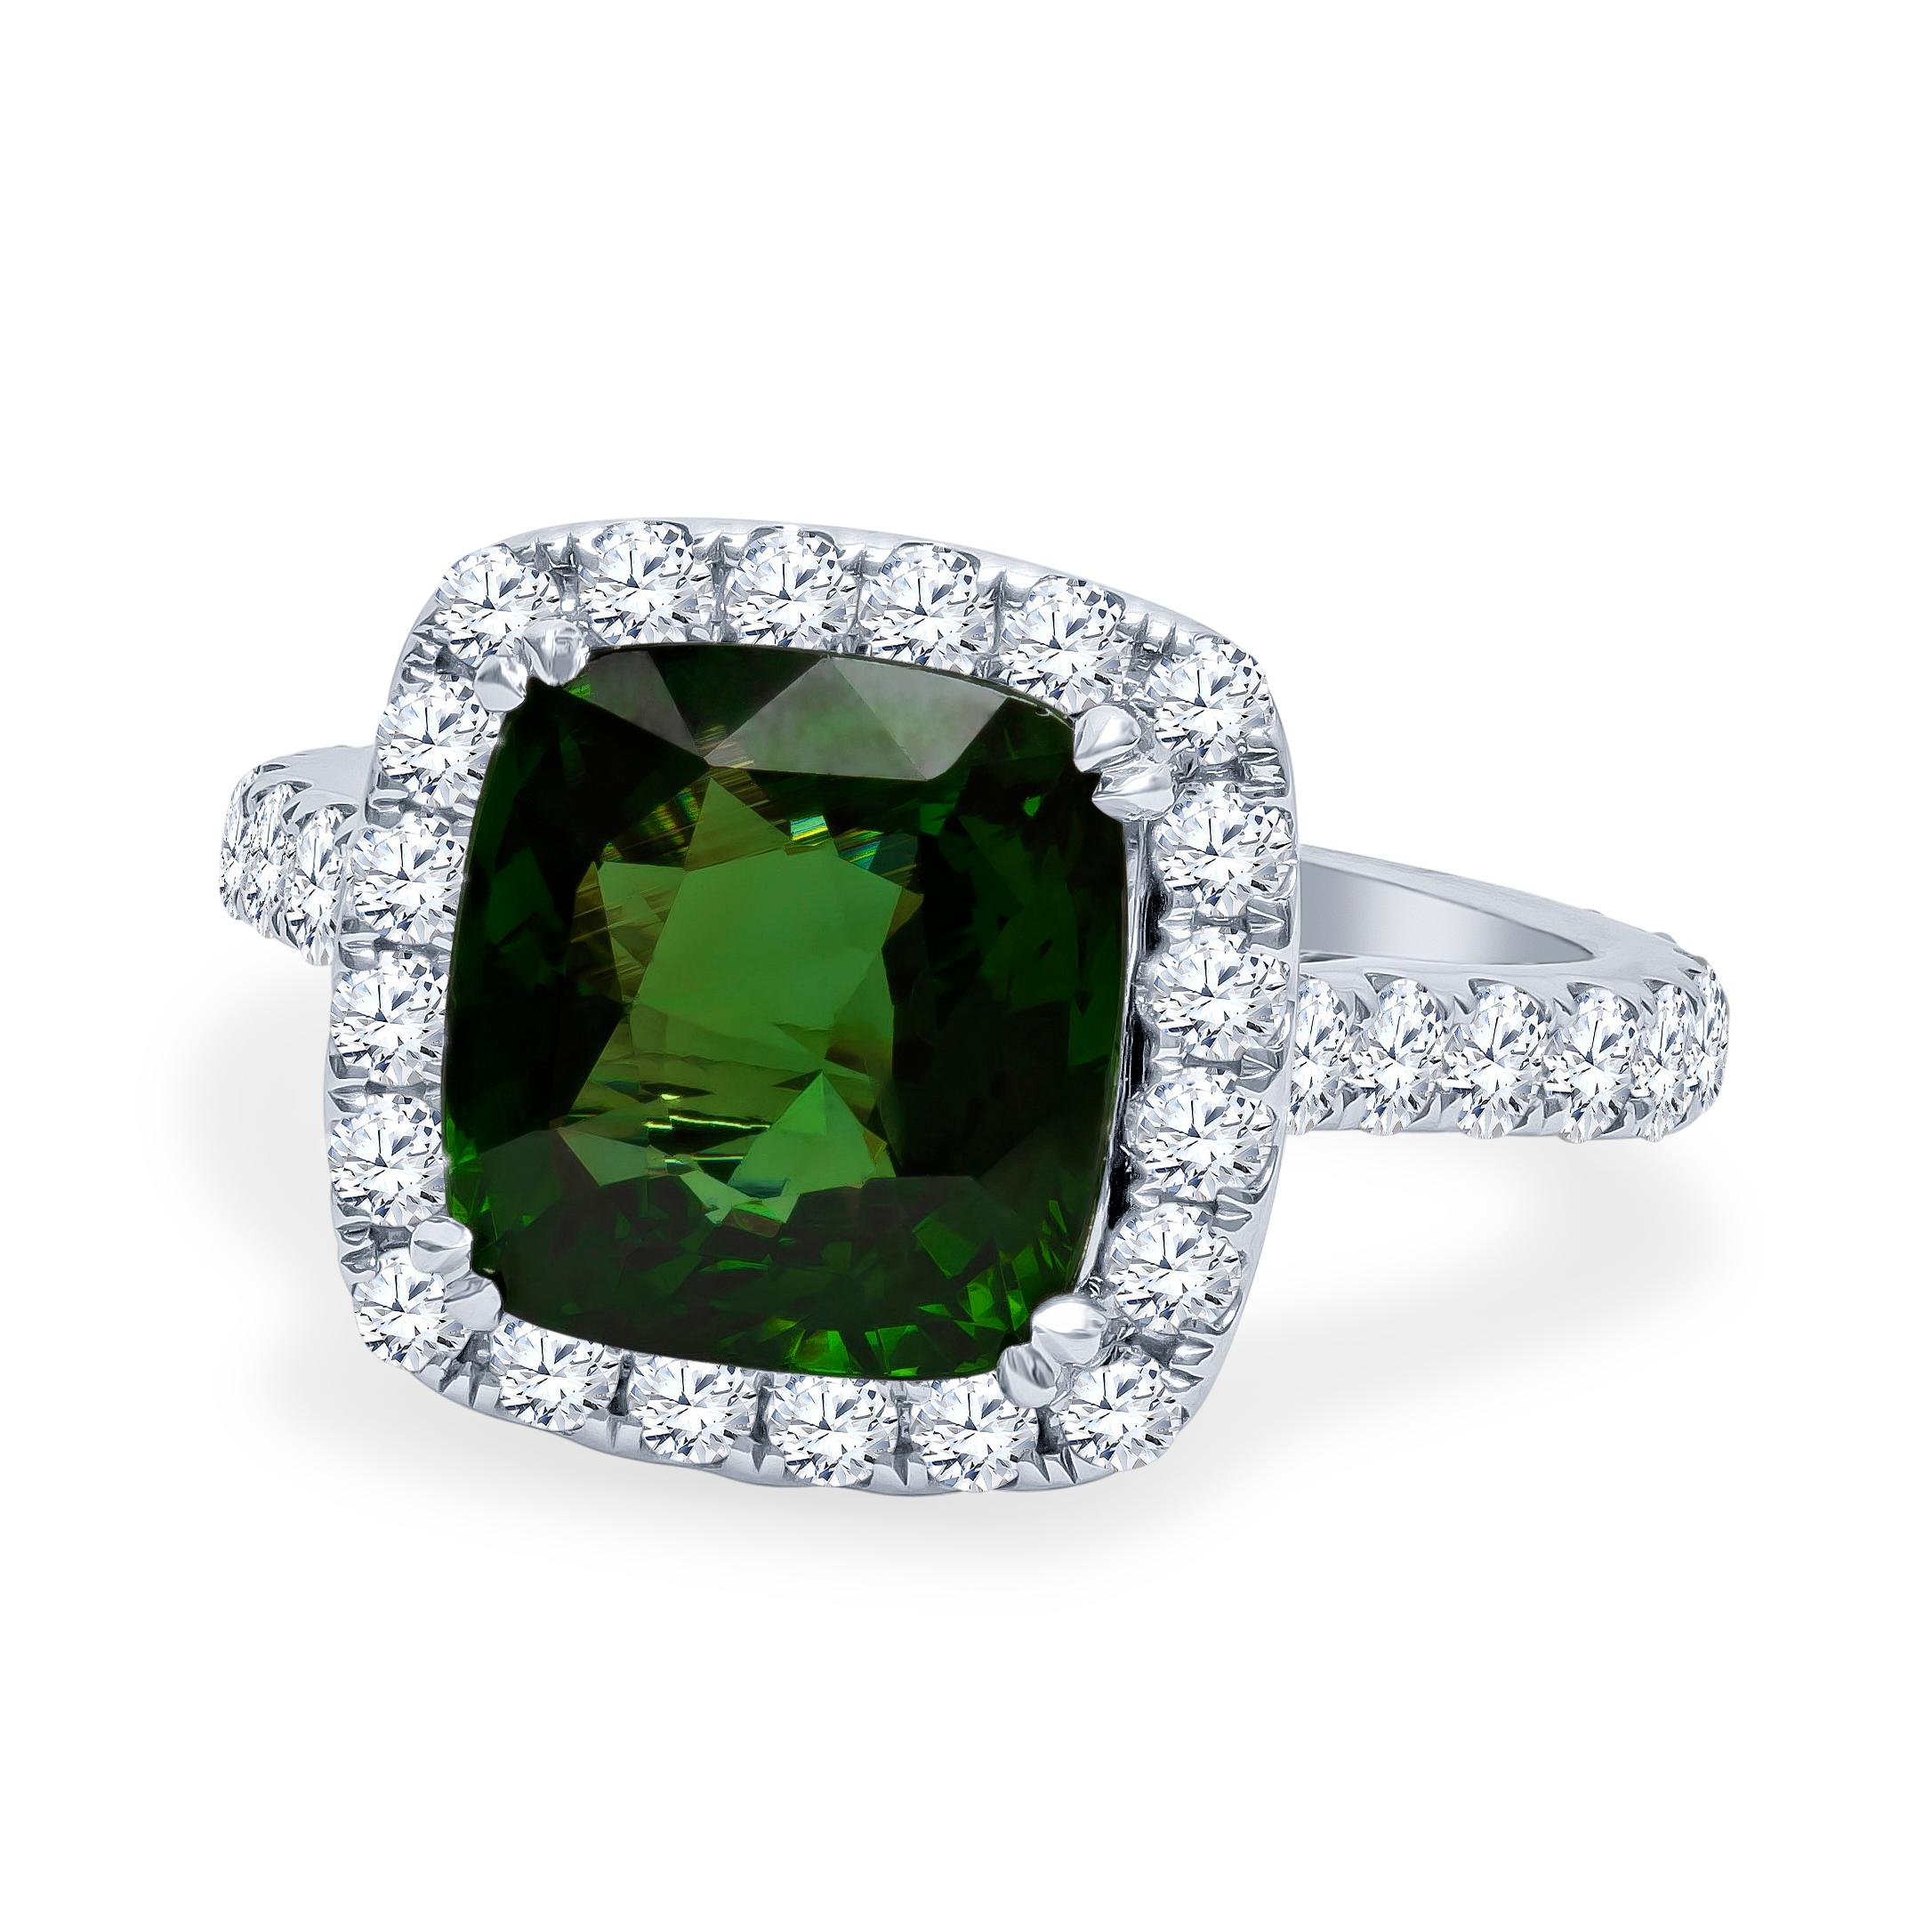 18K white gold large cushion shape halo ring set with one 5.42 Carat total weight cushion cut green zircon ring with 0.52 carats total weight of split prong-set round brilliant diamonds. Ring size 7, may be adjusted larger or smaller upon request.